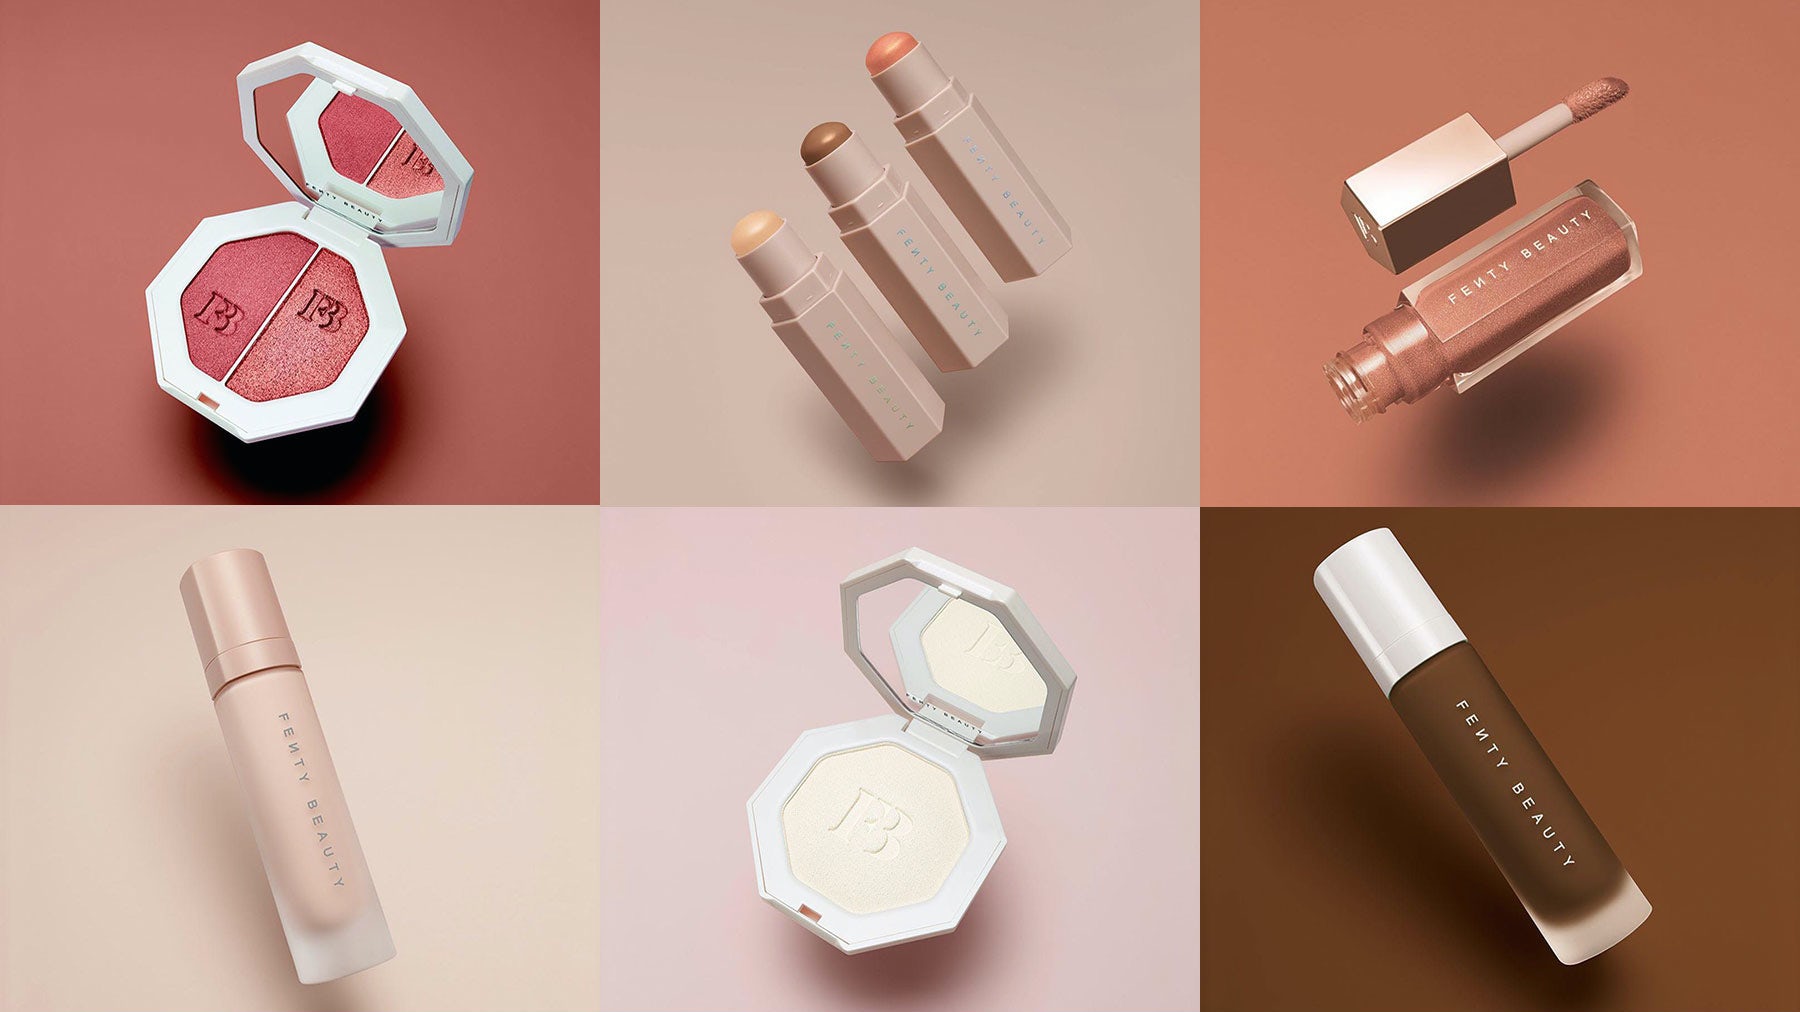 LVMH, Avantium to investigate sustainable packaging for perfumes and cosmetics  LVMH, Avantium to investigate sustainable packaging for perfumes and cosmetics  LVMH, Avantium to investigate sustainable packaging for perfumes and  cosmetics